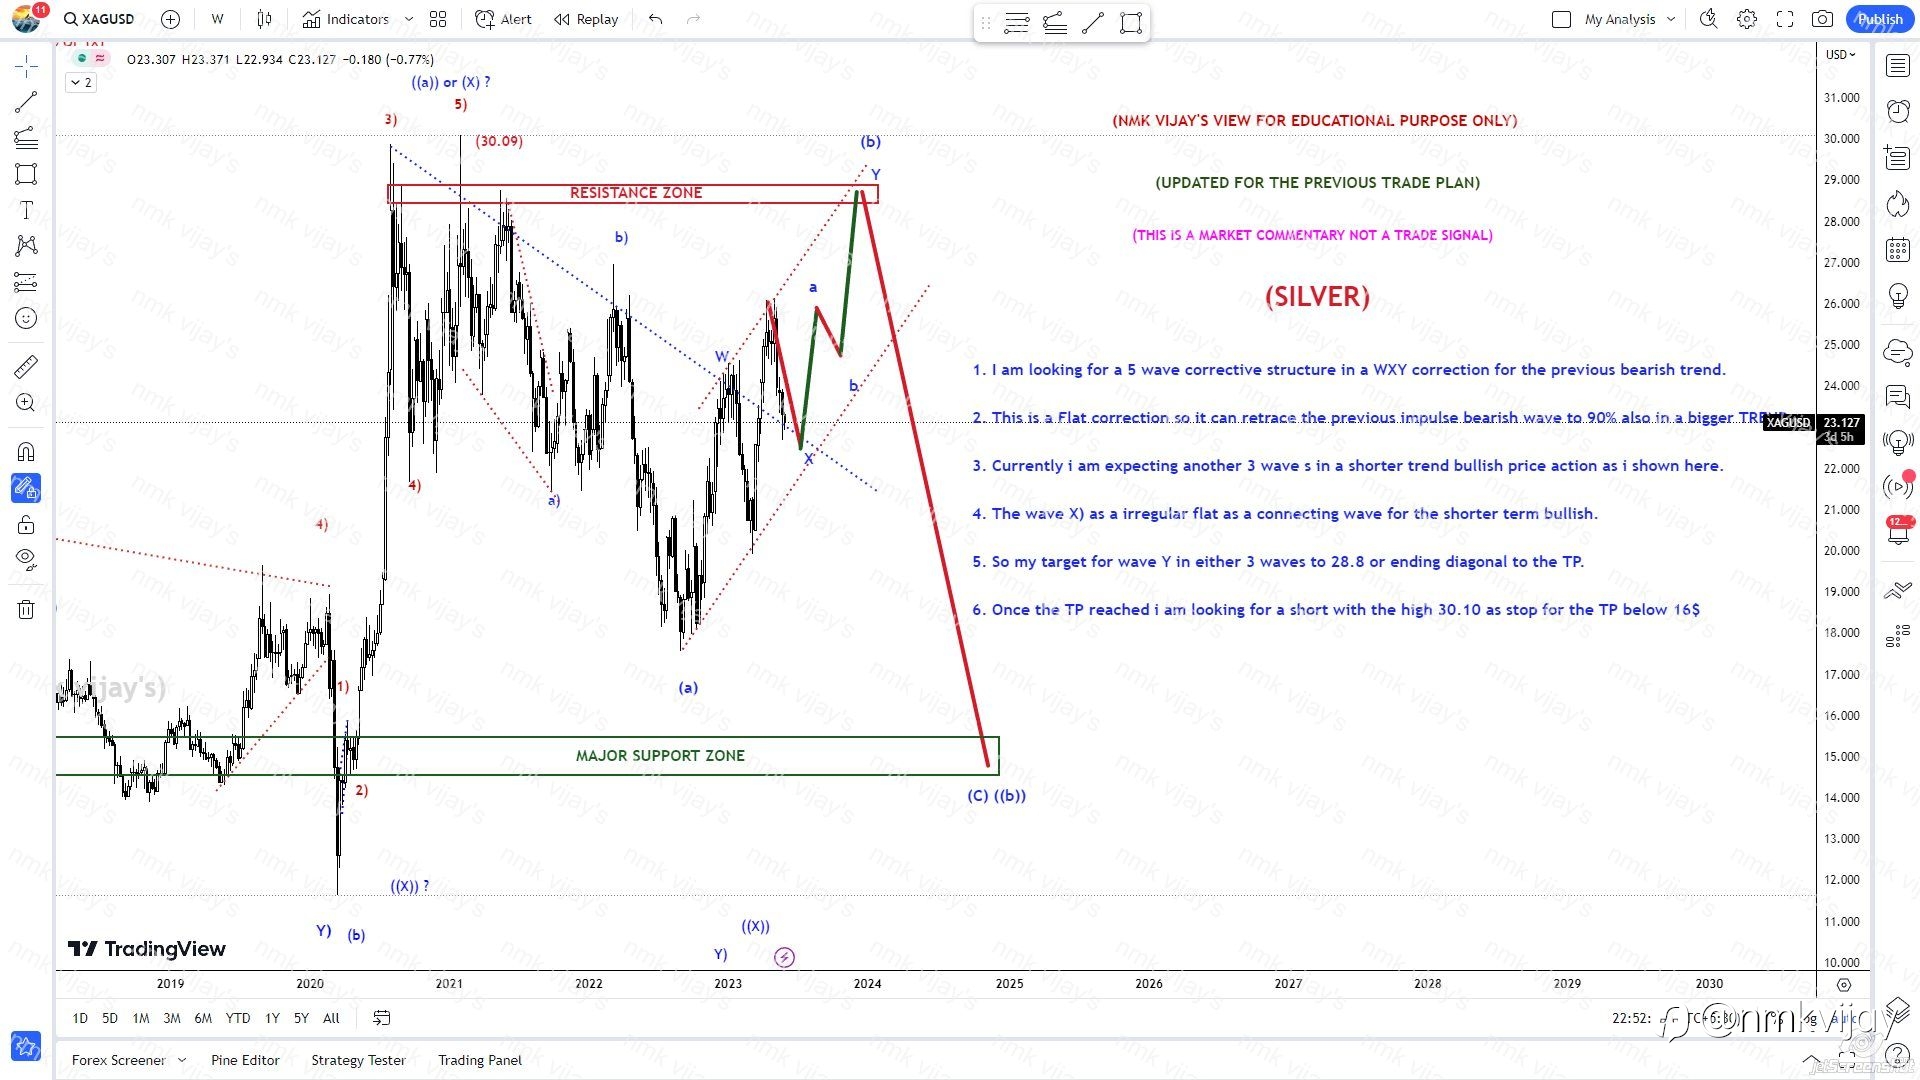 SILVER: Expecting to 28.8 as a Y wave of (b) to complete in FLAT